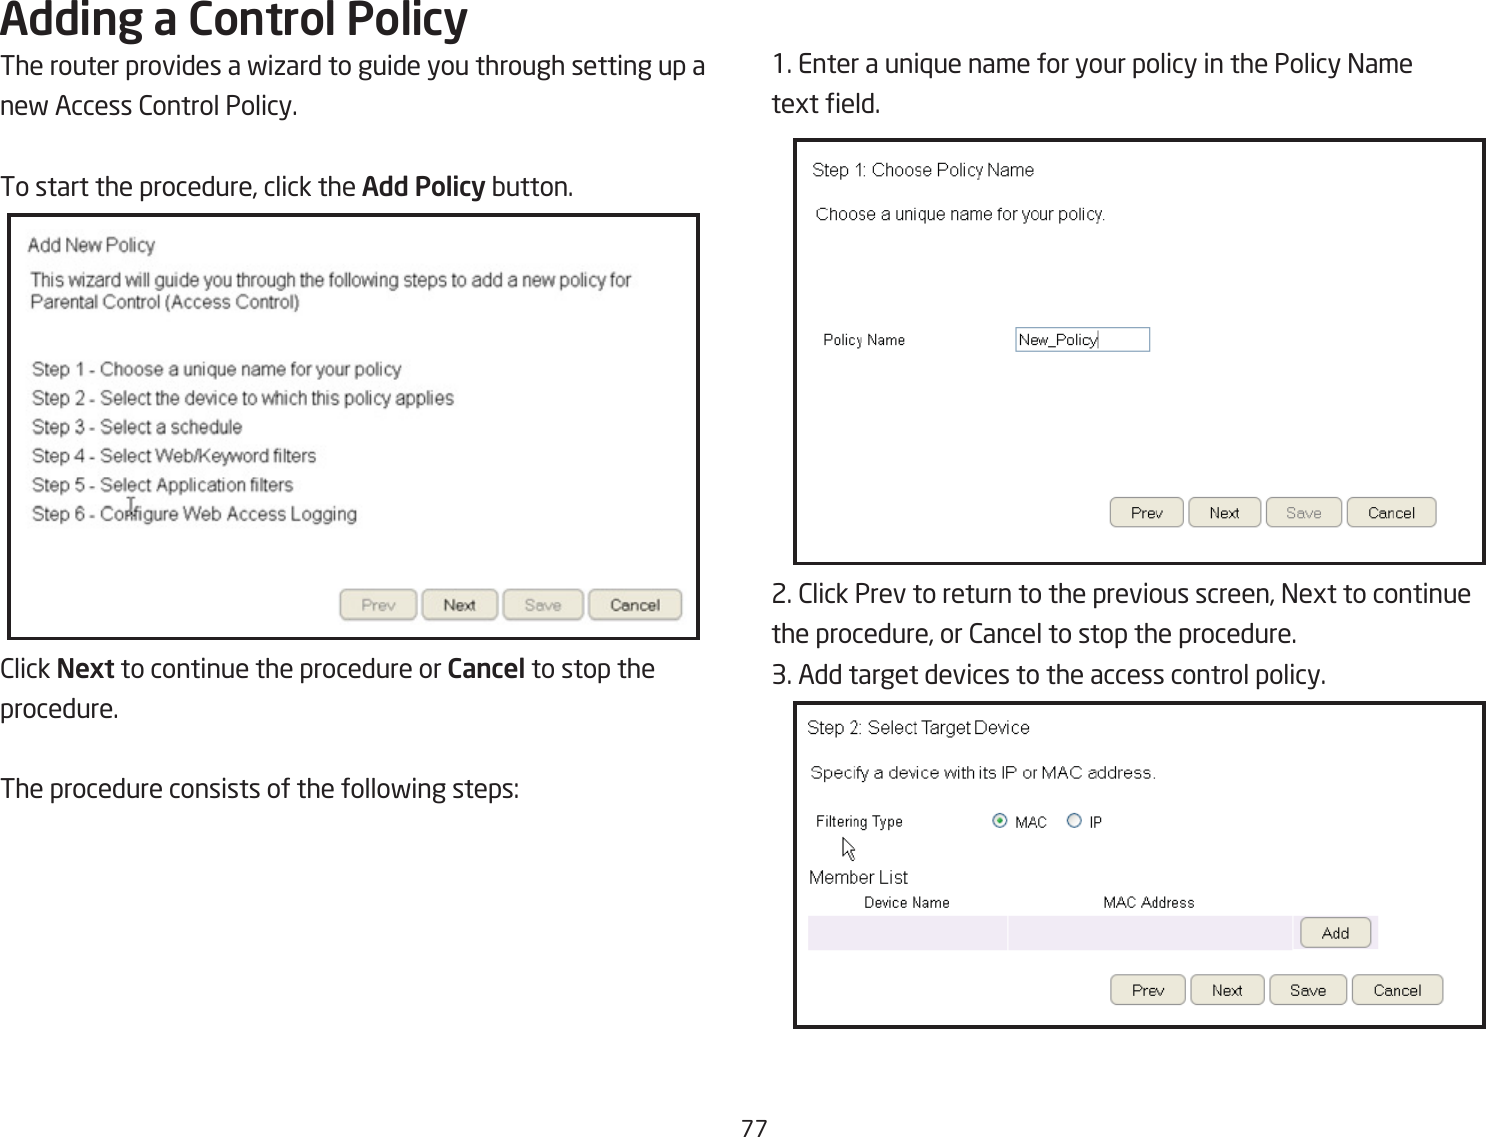 &amp;&amp;Adding a Control PolicyThe router provides a fiiard to guide you through setting up a nef Access 2ontrol Policy.To start the procedure, click the Add Policy Qutton.2lick Next to continue the procedure or Cancel to stop theprocedure.The procedure consists of the follofing steps:1. Enter a uni`ue name for your policy in the Policy =ametegt eld.2. 2lick Prev to return to the previous screen, =egt to continuethe procedure, or 2ancel to stop the procedure.3. Add target devices to the access control policy.